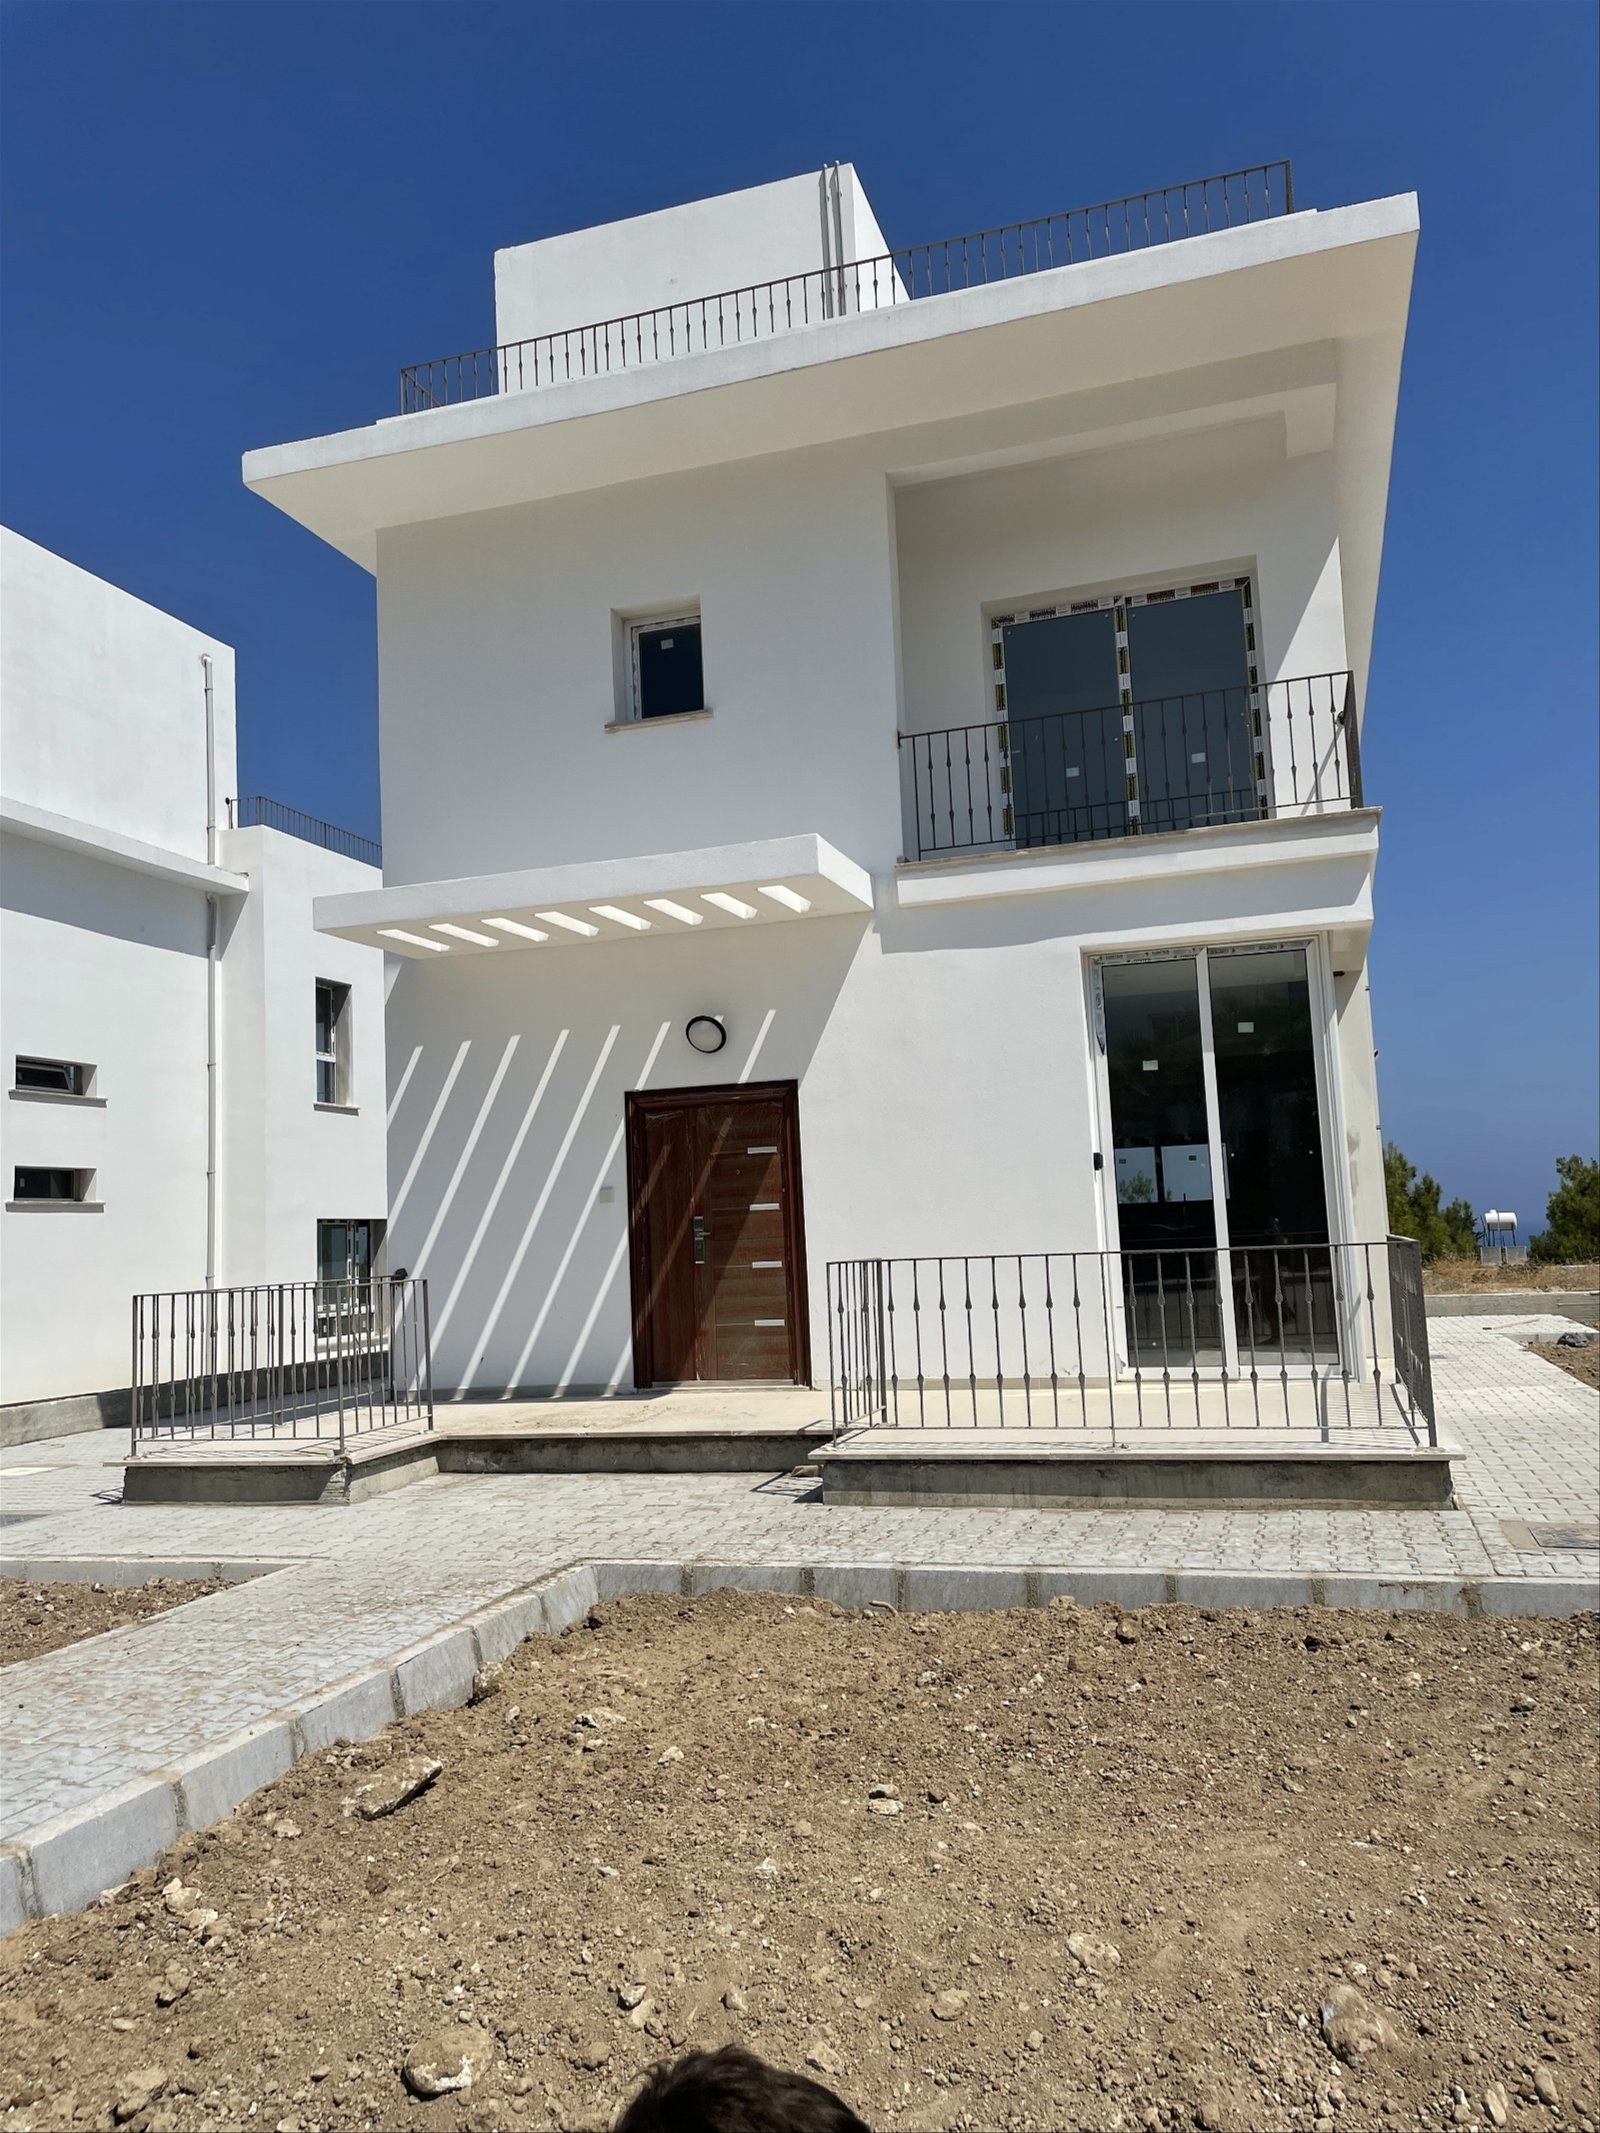 For Sale 3+1 New Villa in Catalkoy-55194fab-d0ad-422c-9af7-9b0b425f1367